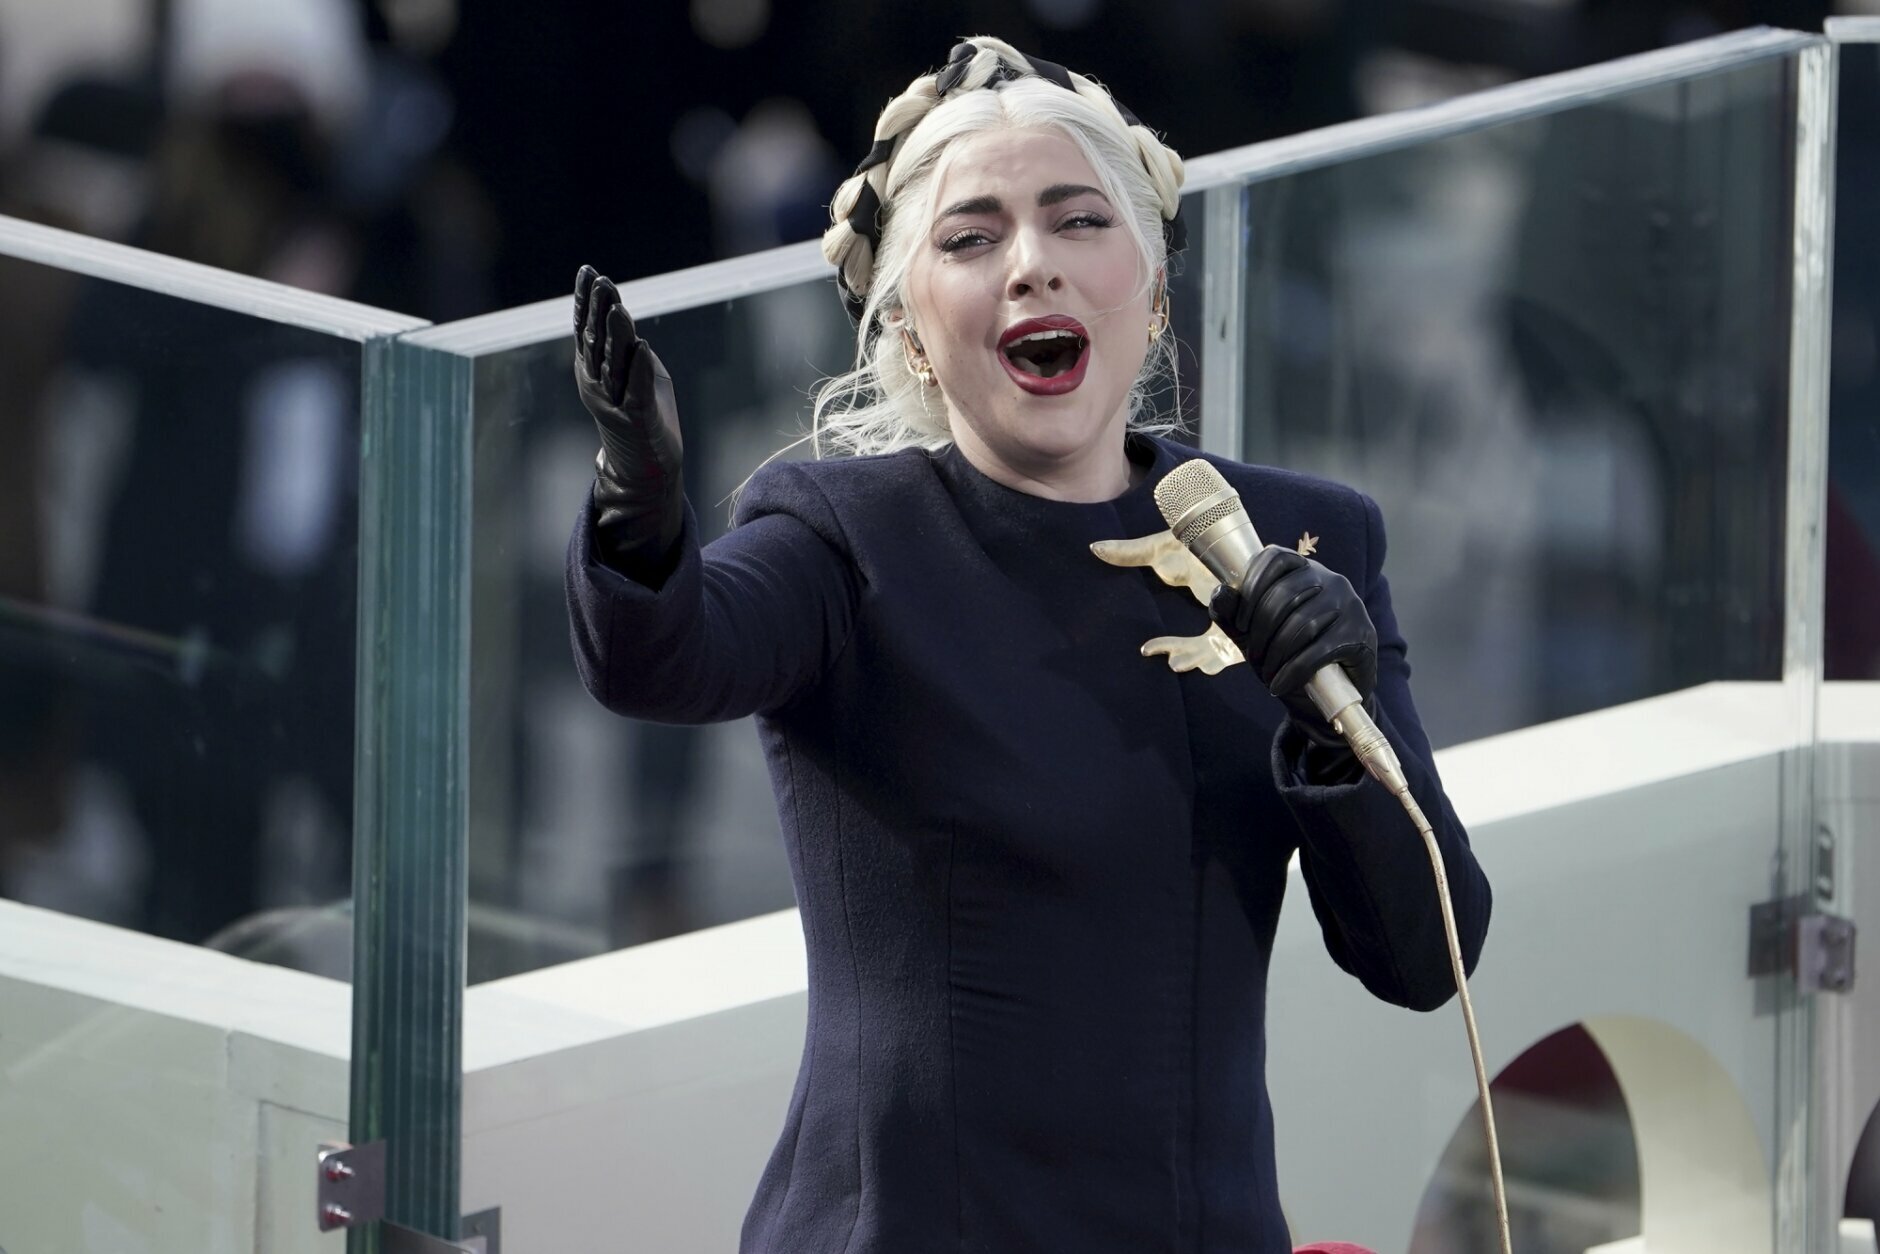 <p>A full-throated, supremely confident Lady Gaga belted out the national anthem during Biden&#8217;s inauguration.</p>
<blockquote class="twitter-tweet tw-align-center">
<p dir="ltr" lang="en">The National Anthem has never sounded better</p>
<p>Thank you <a href="https://twitter.com/ladygaga?ref_src=twsrc%5Etfw">@LadyGaga</a> for that wonderful performance! <a href="https://twitter.com/hashtag/InaugurationDay?src=hash&amp;ref_src=twsrc%5Etfw">#InaugurationDay</a> <a href="https://t.co/mk4qMIrnmu">pic.twitter.com/mk4qMIrnmu</a></p>
<p>— Biden Inaugural Committee (@BidenInaugural) <a href="https://twitter.com/BidenInaugural/status/1351949281318486016?ref_src=twsrc%5Etfw">January 20, 2021</a></p></blockquote>
<p><script async src="https://platform.twitter.com/widgets.js" charset="utf-8"></script></p>
